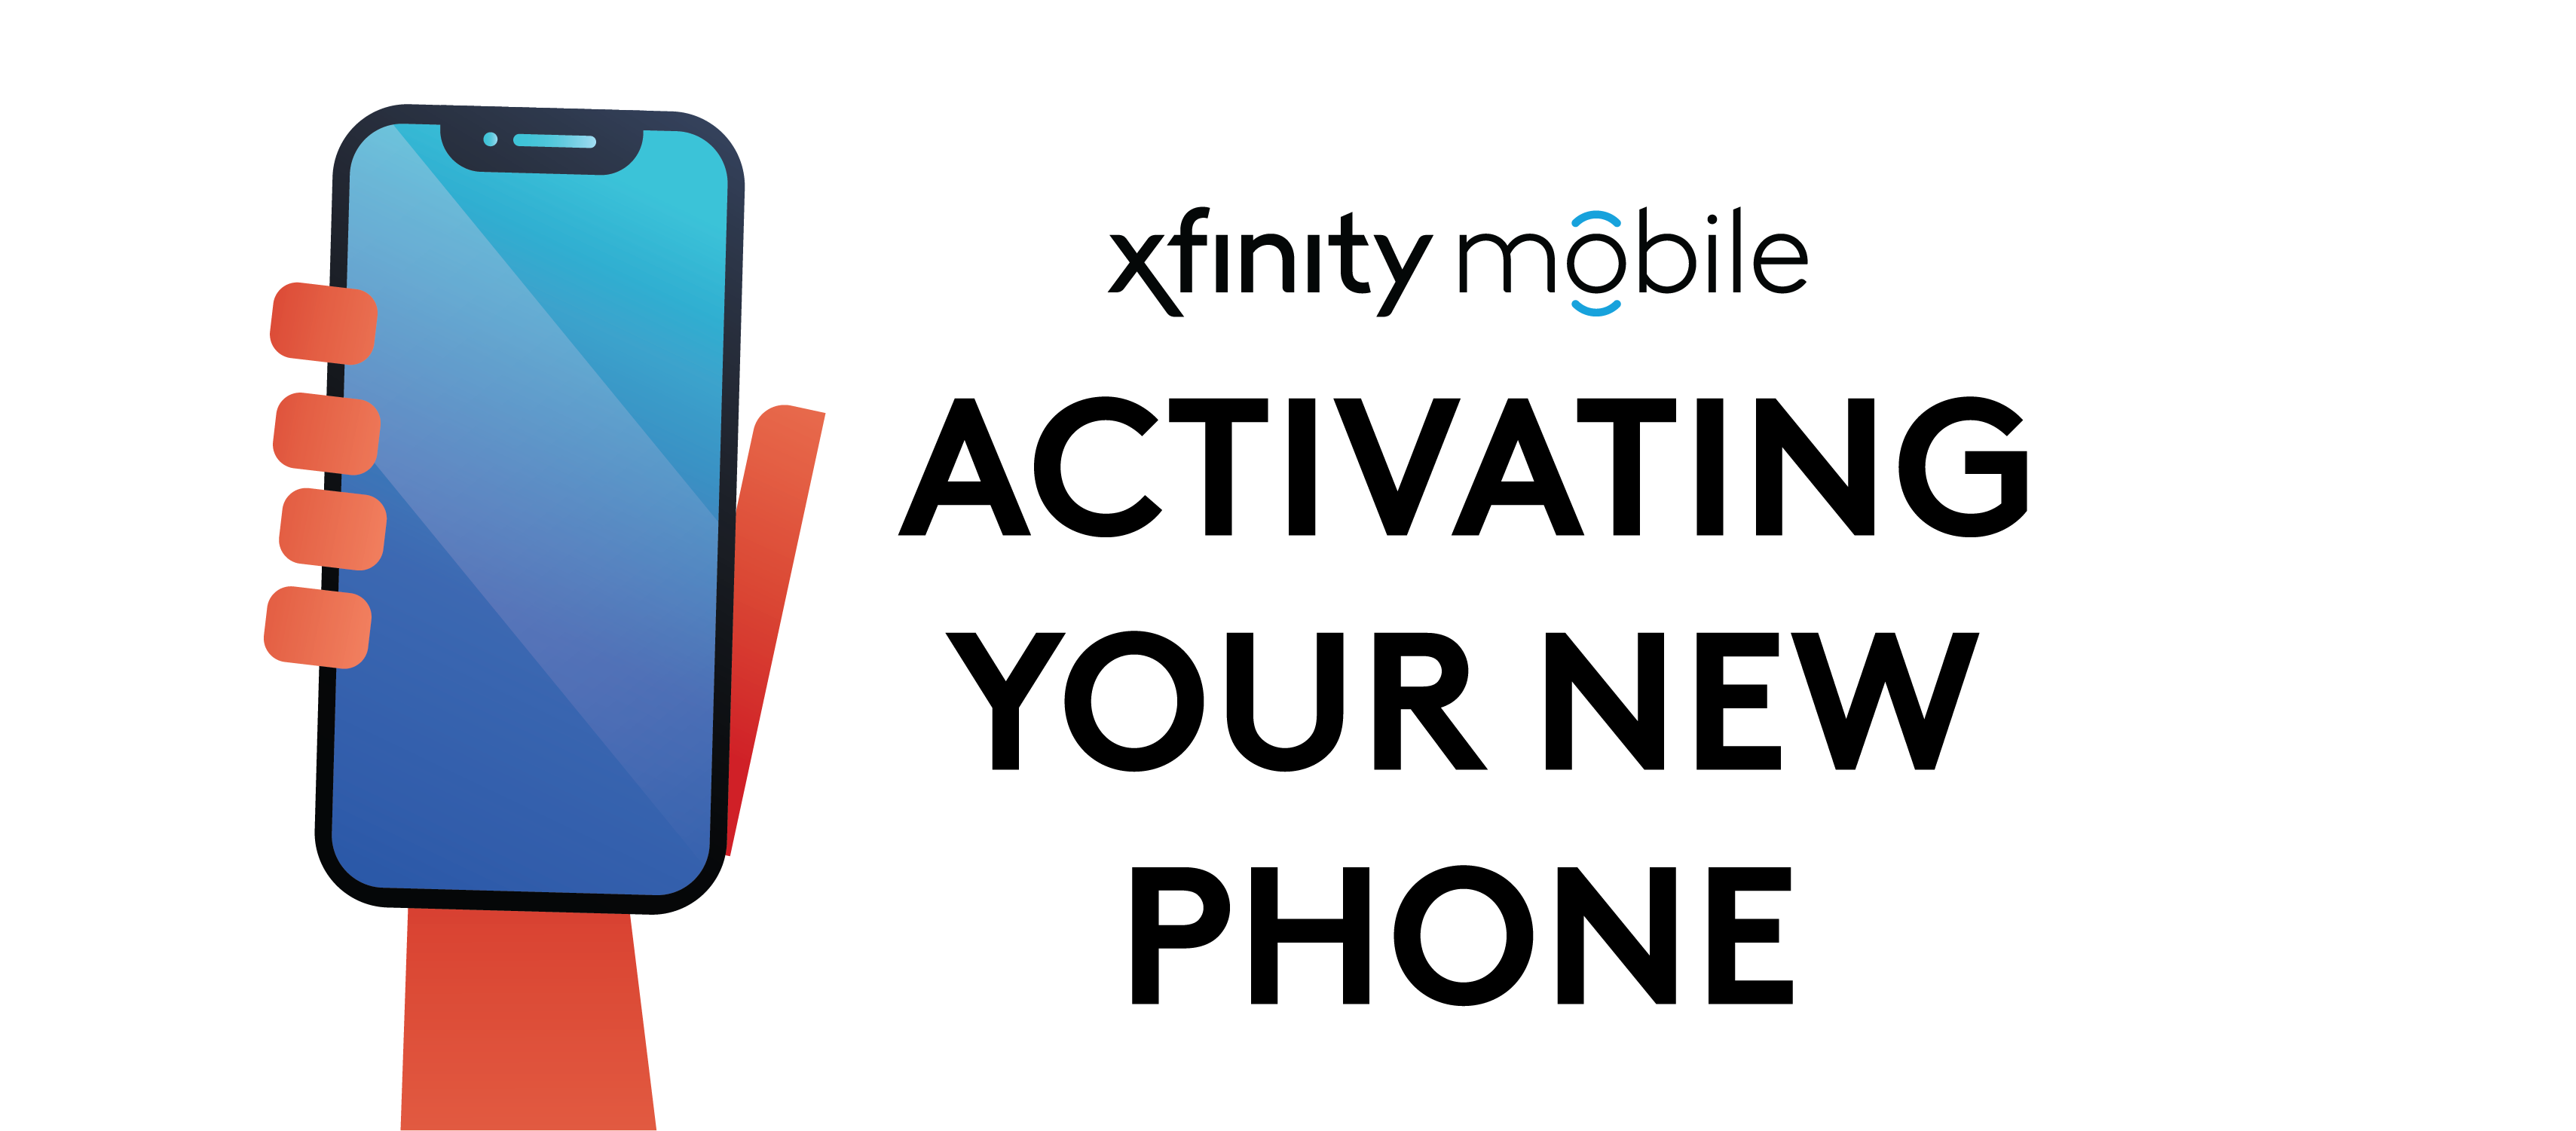 Xfinity Mobile New Phone Activation